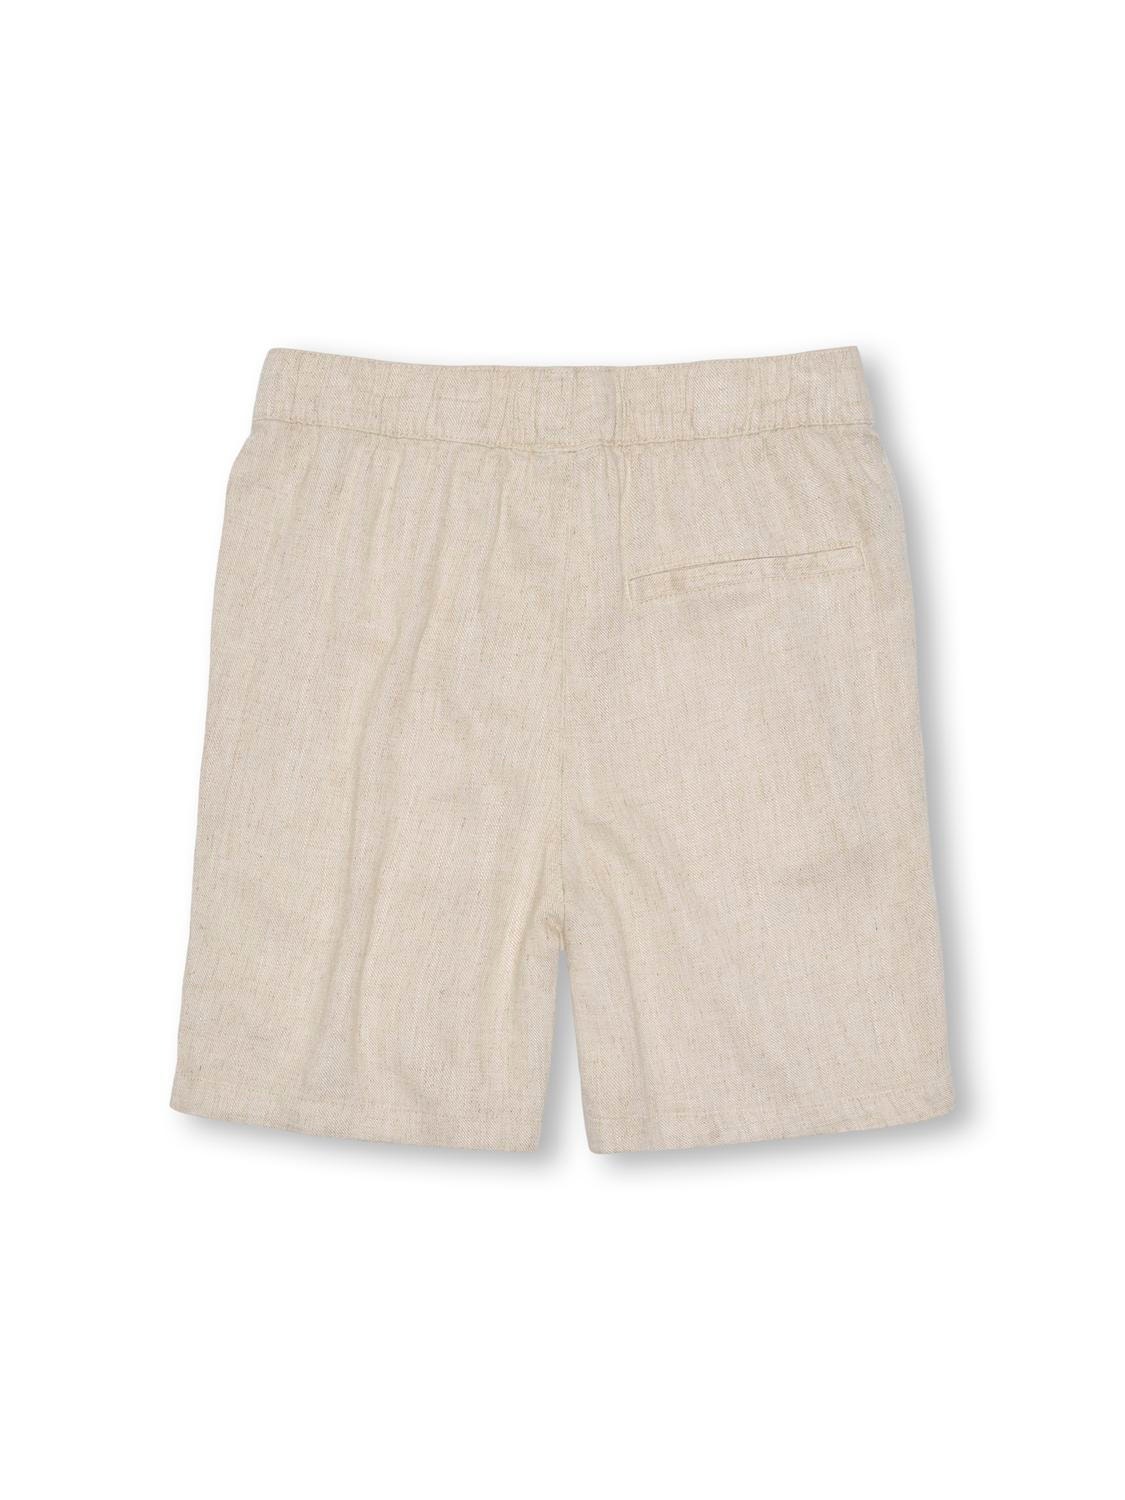 ONLY Normal passform Shorts -Oatmeal - 15327738